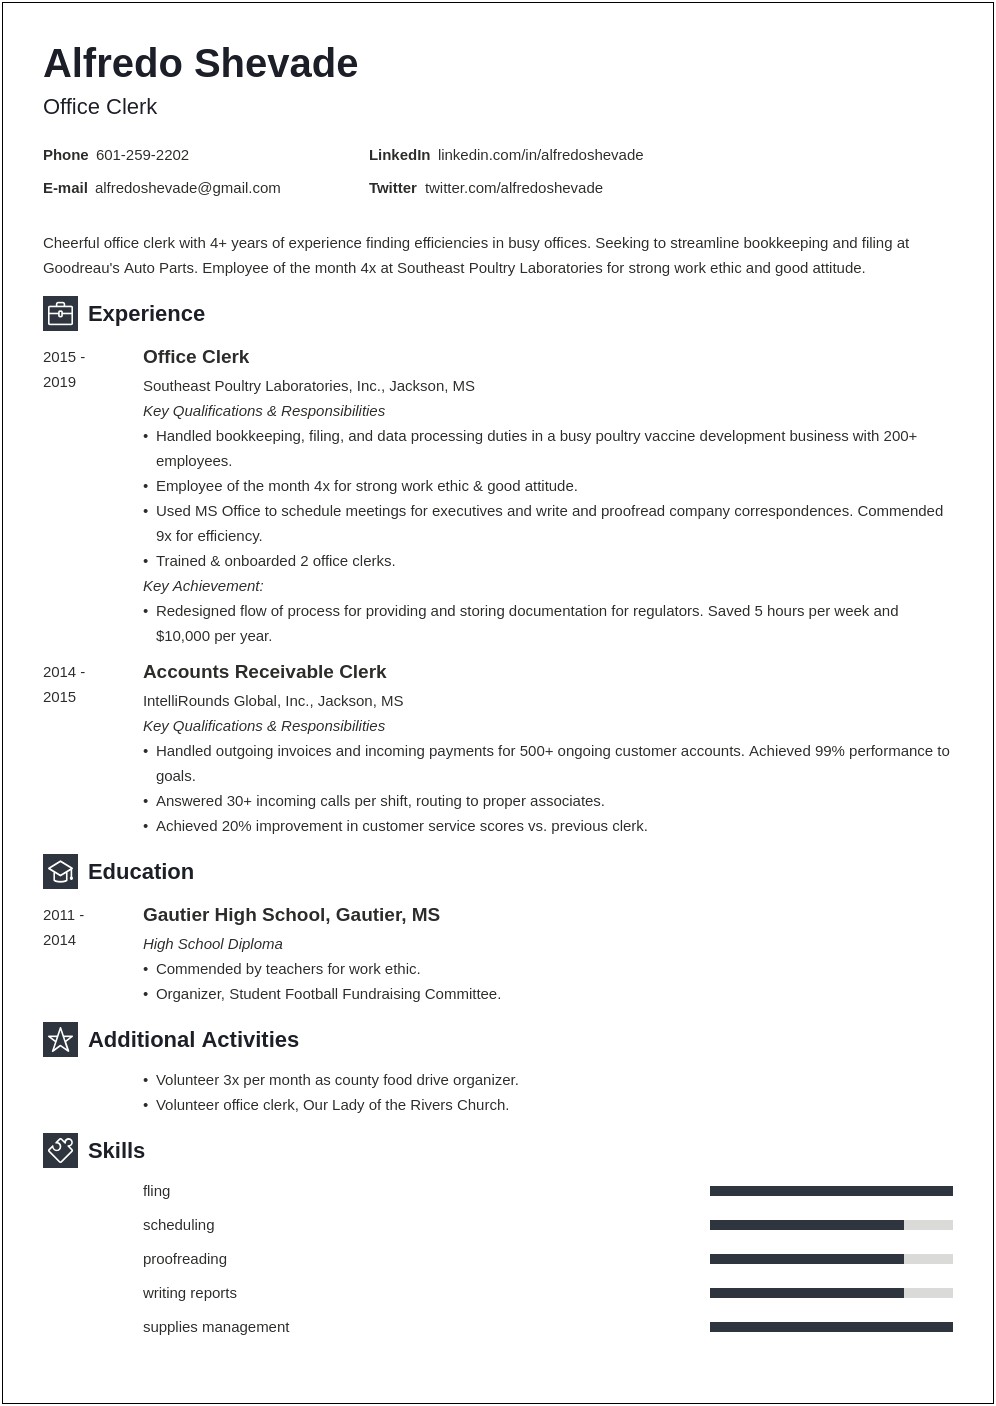 Resume Summary Examples For Office Clerk